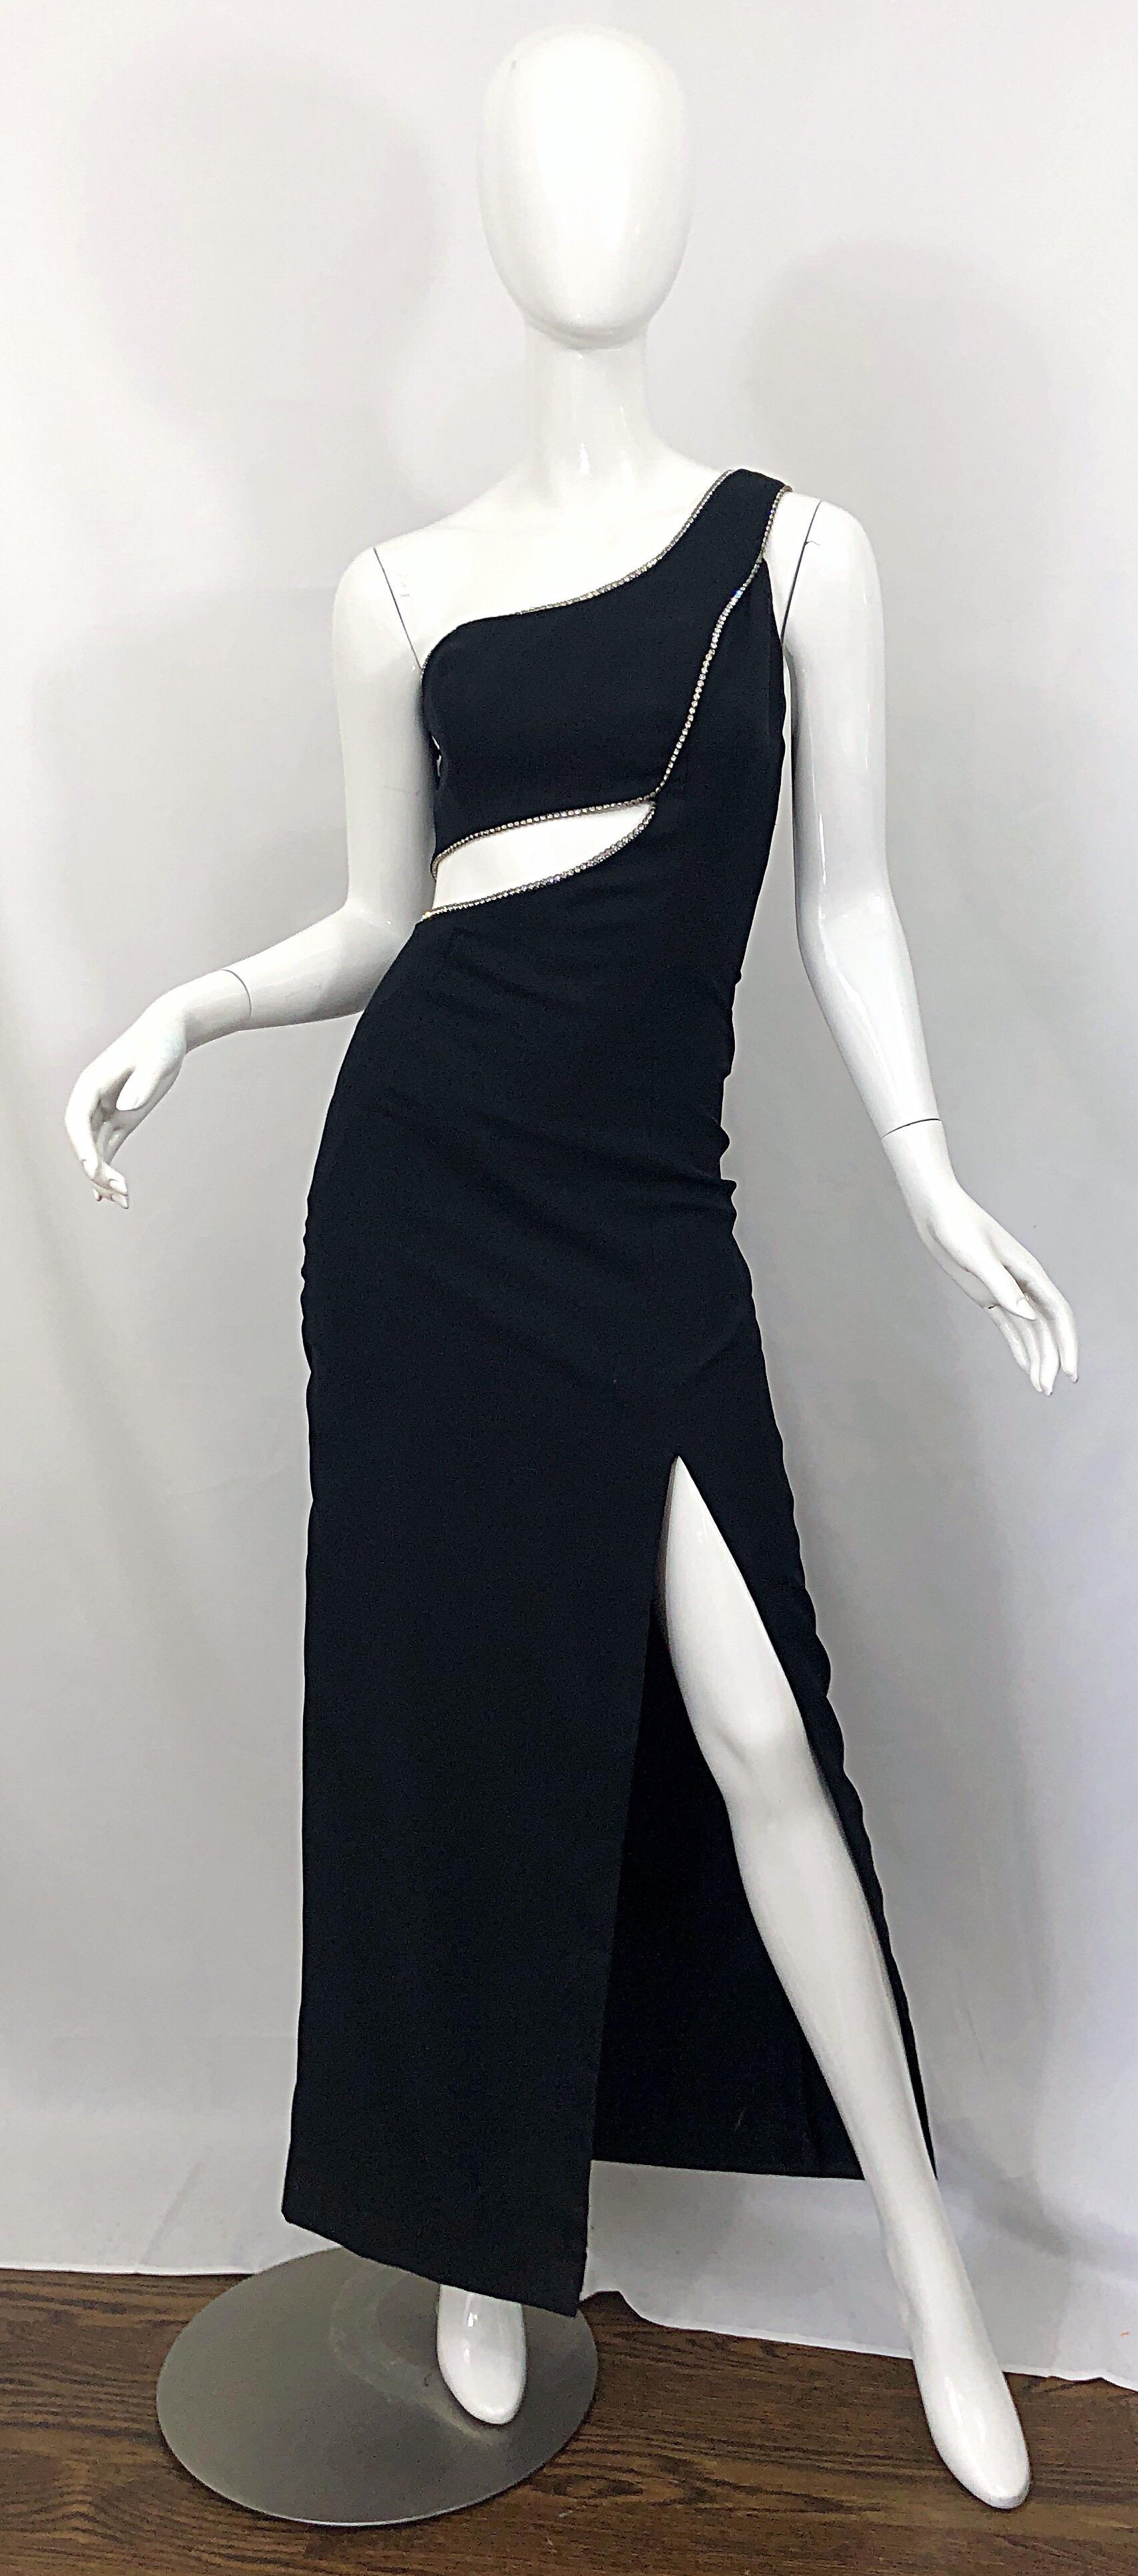 Sexy 1990s 90s black crepe rayon and rhinestone encrusted one shoulder cut-out Grecian evening gown! Very flattering, and super slimming!
Features a fitted one shoulder bodice, with cut-outs above the front and back waist. Hundreds of sparkly